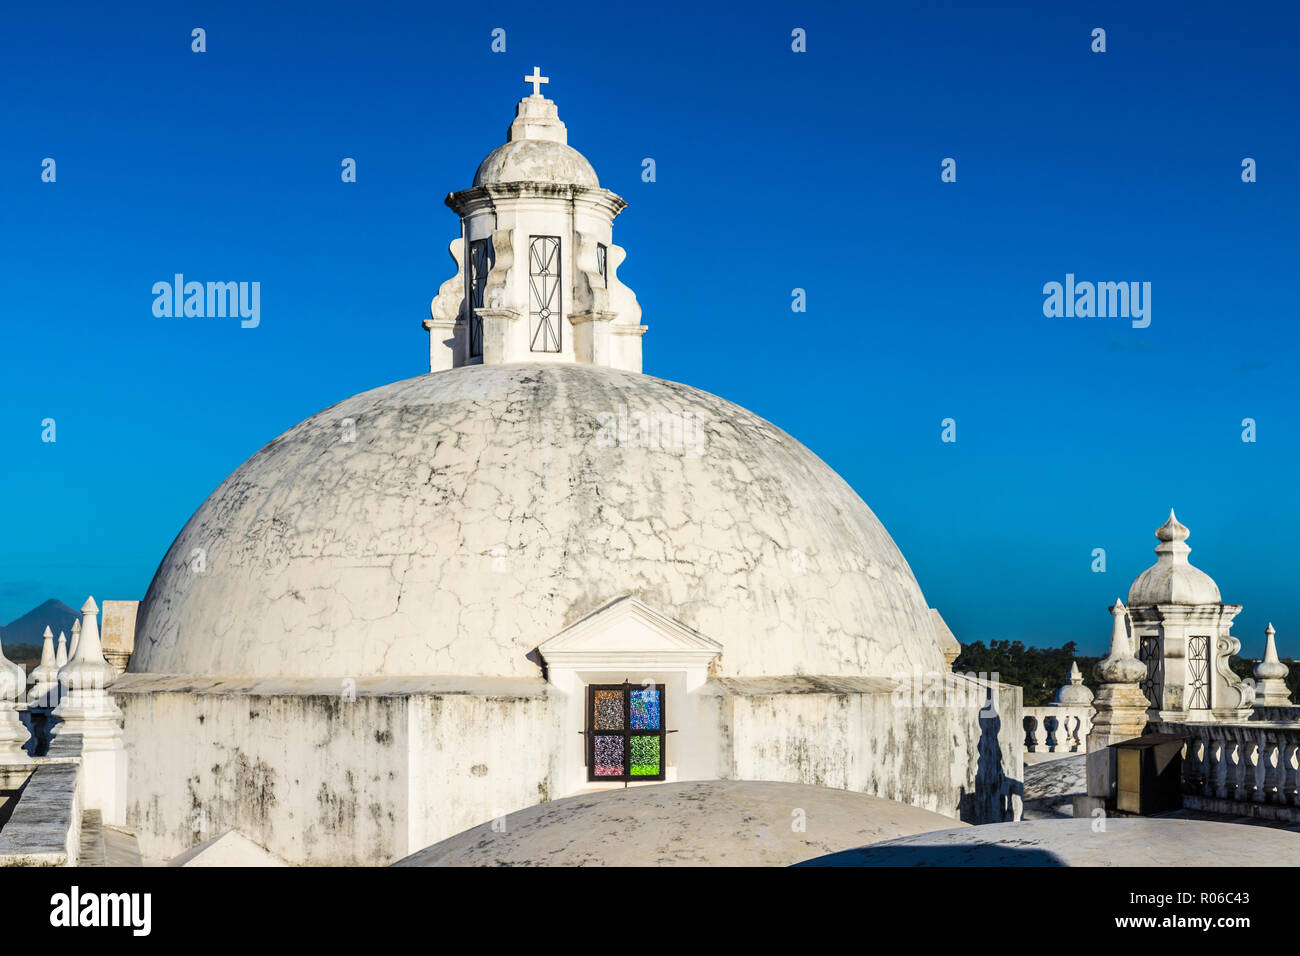 The beautiful white domes on the roof of the Cathedral of the Assumption, UNESCO World Heritage Site, Leon, Nicaragua, Central America Stock Photo